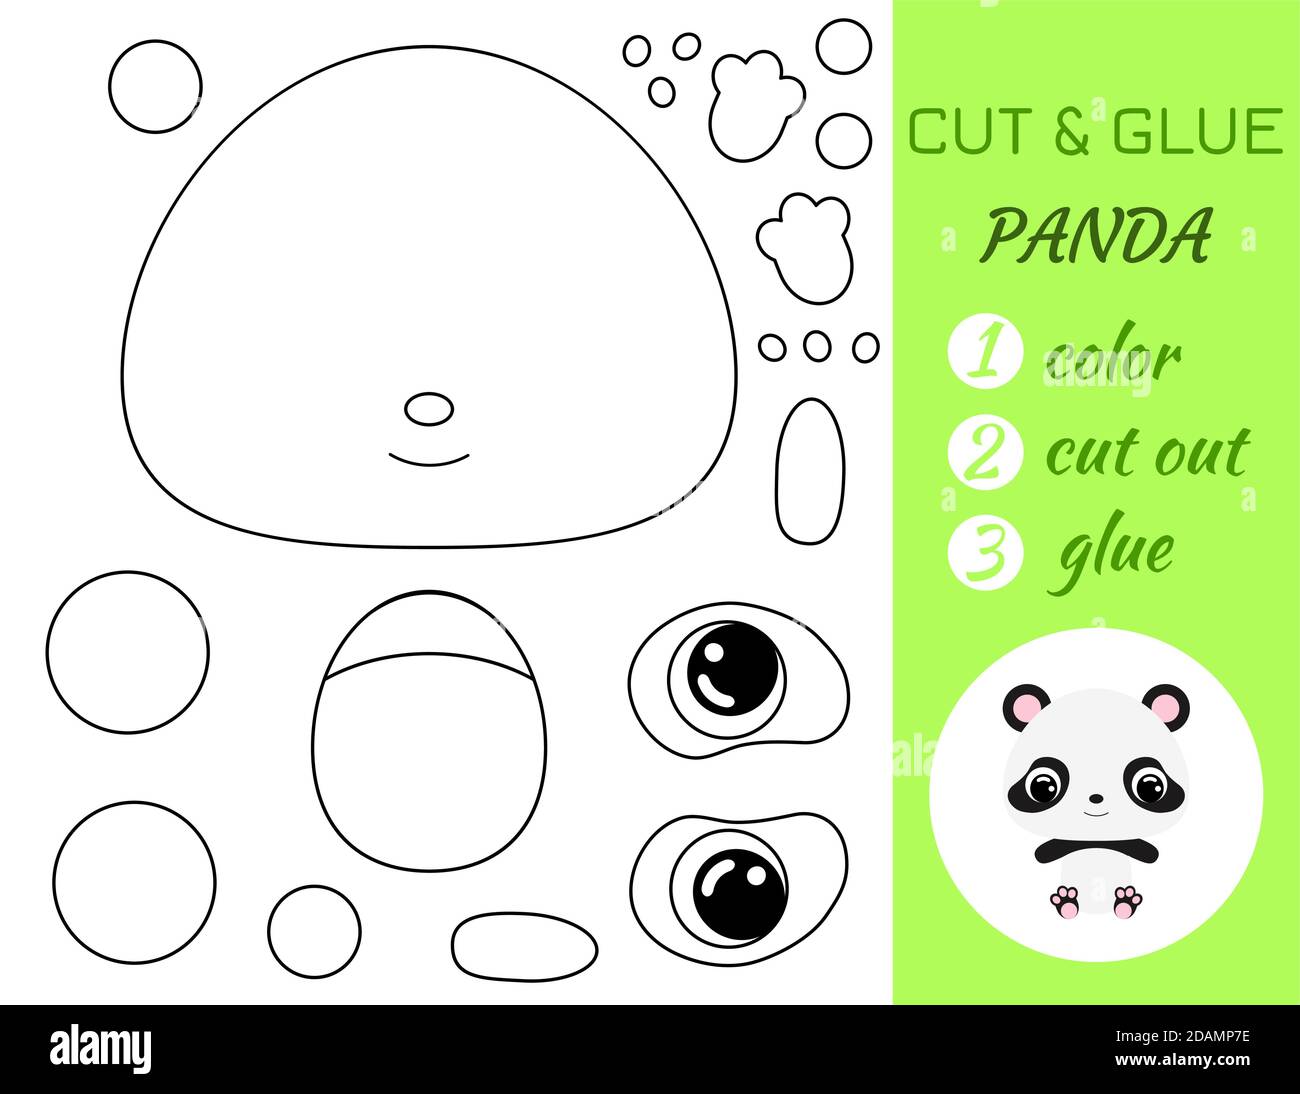 Simple educational game coloring page cut and glue sitting baby panda for kids educational paper game for preschool children color cut parts and gl stock vector image art